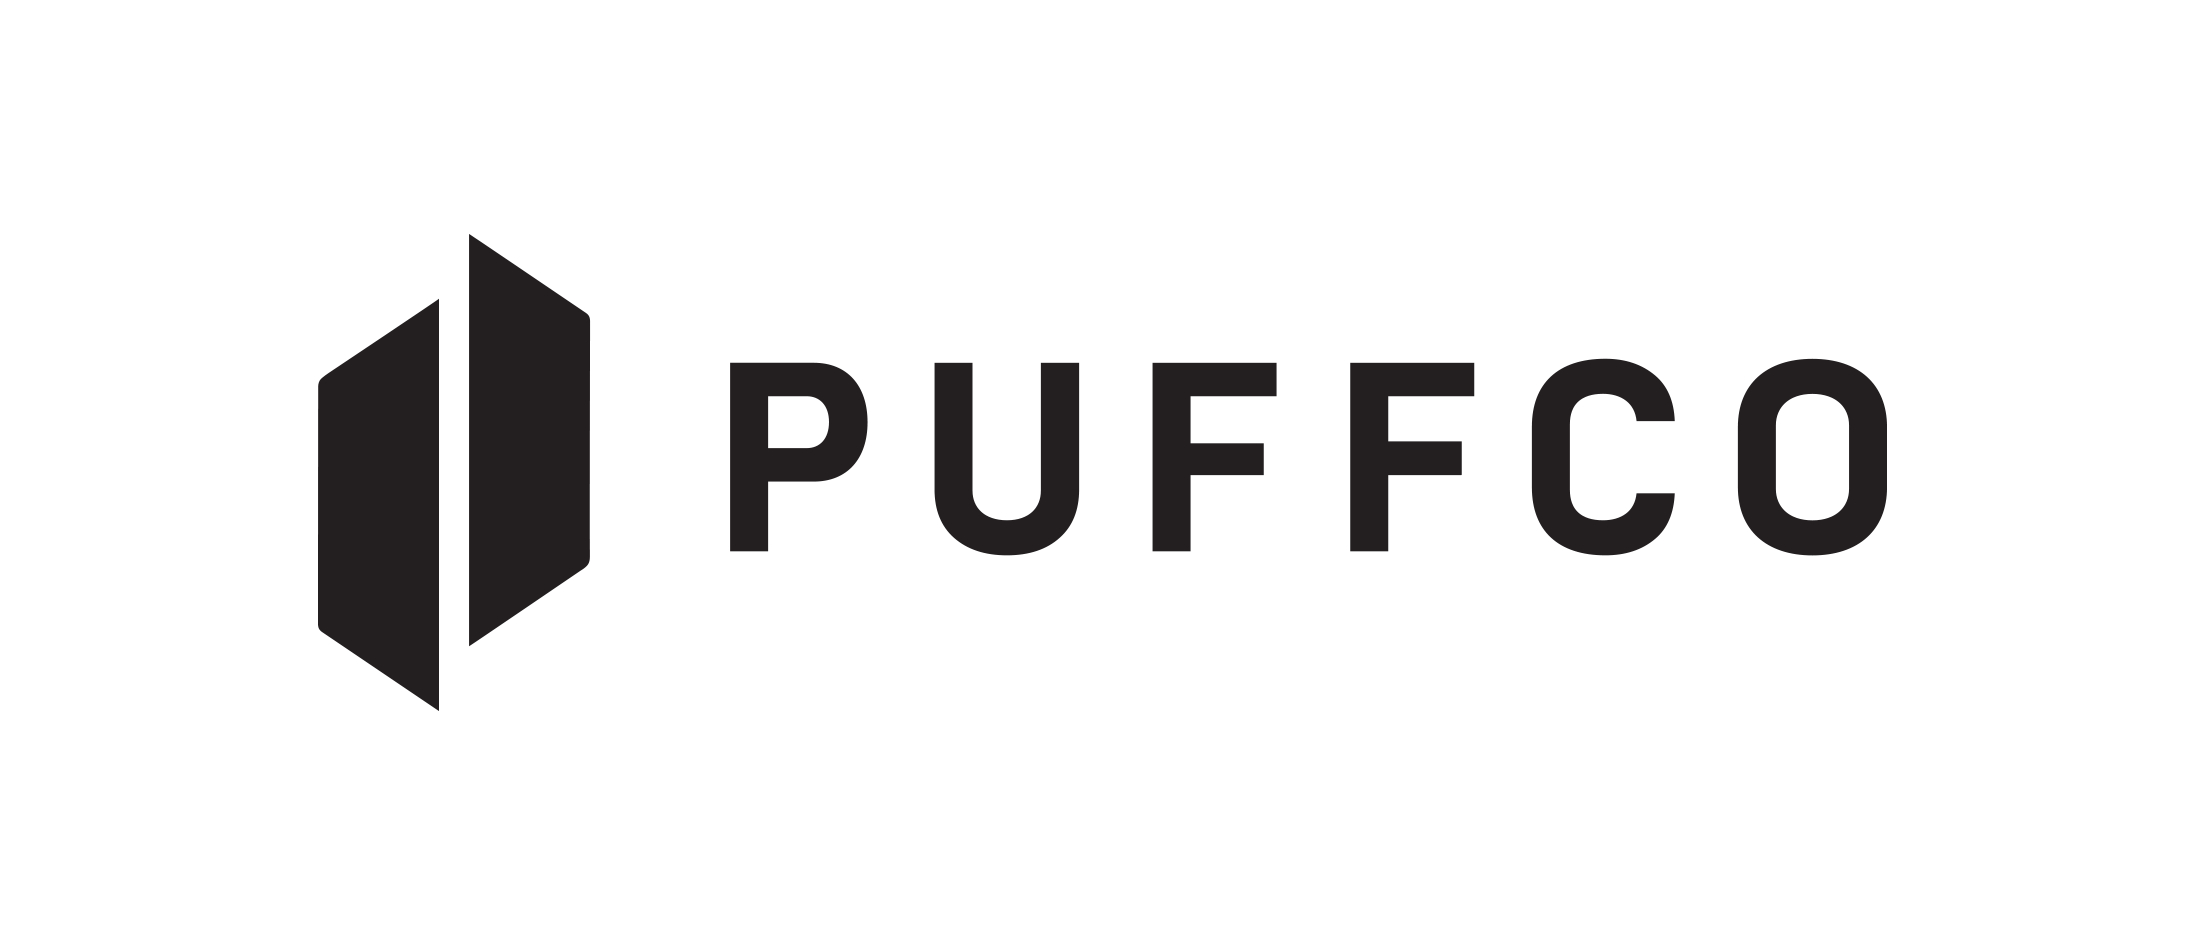 Puffco Teams Up With AriZona Beverages For Exclusive 4/20 Release